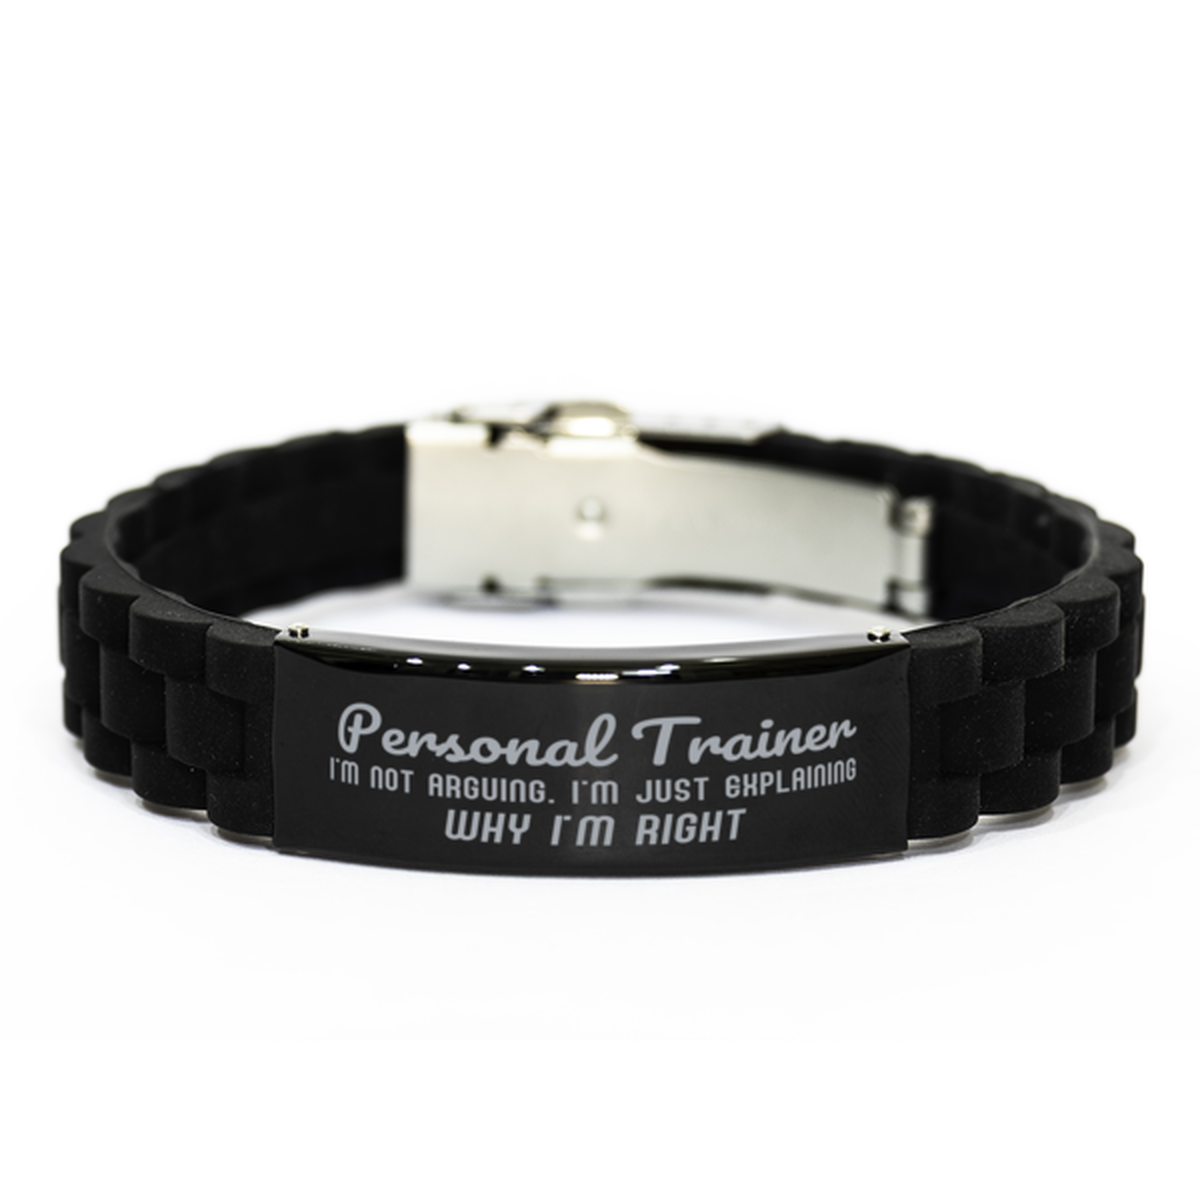 Personal Trainer I'm not Arguing. I'm Just Explaining Why I'm RIGHT Black Glidelock Clasp Bracelet, Funny Saying Quote Personal Trainer Gifts For Personal Trainer Graduation Birthday Christmas Gifts for Men Women Coworker